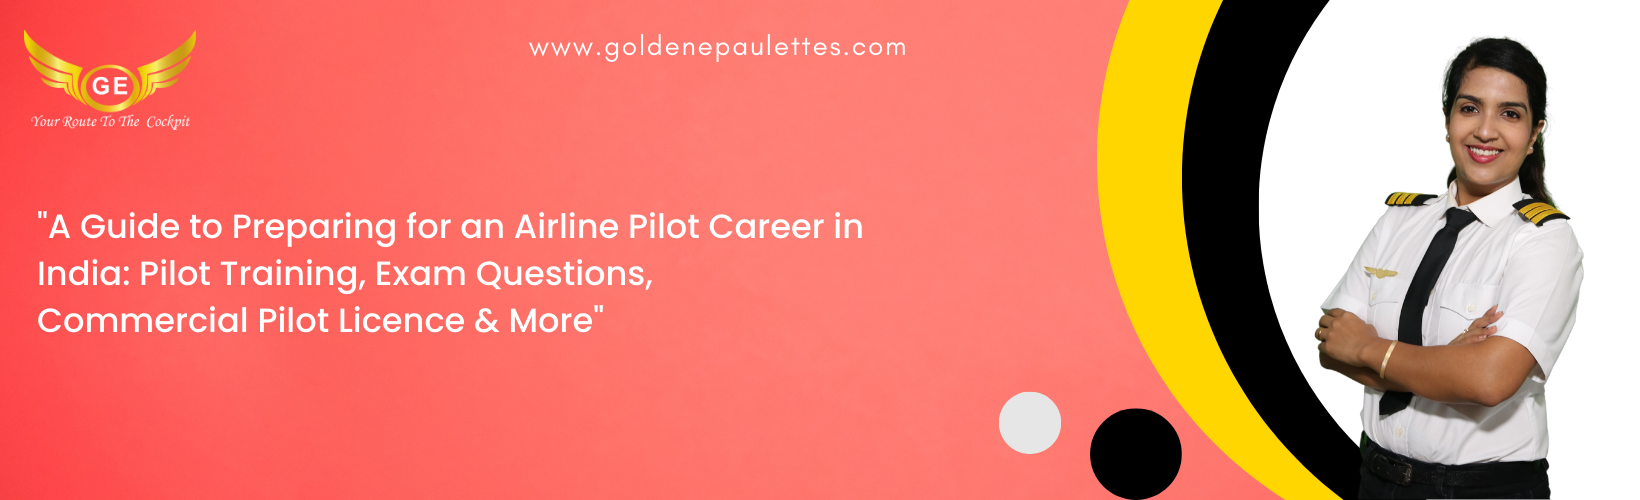 Preparing for an Airline Pilot Career in India